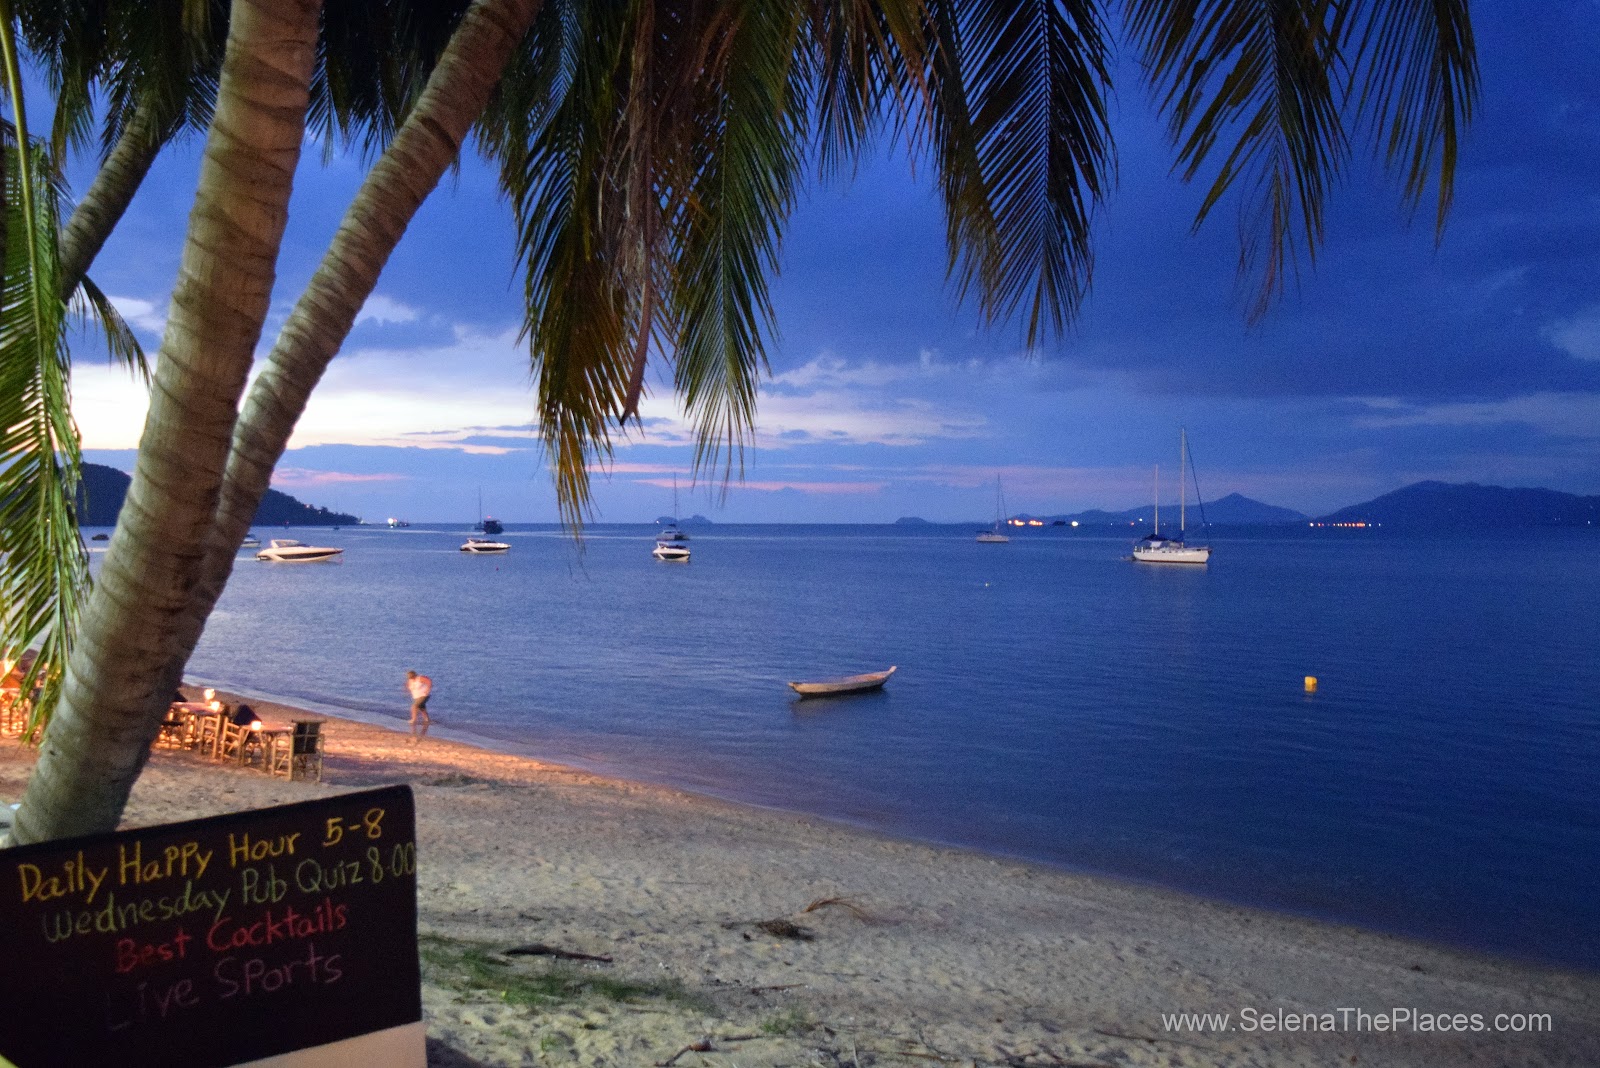 Oh, the places we will go!: Fisherman's Village in Koh Samui